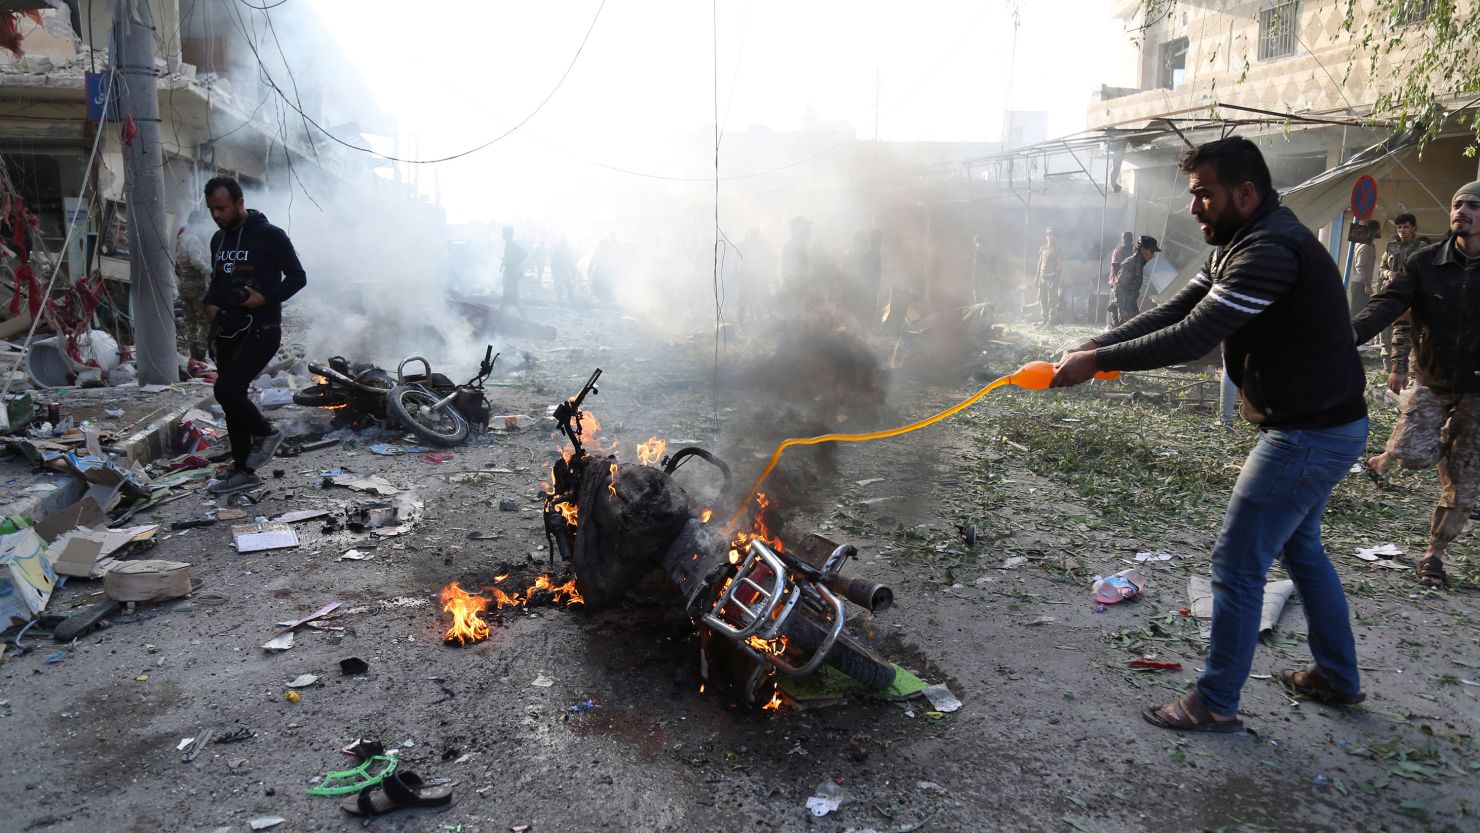 A car bomb exploded in the northern Syrian town of Tal Abyad, killing at least 13 people. 